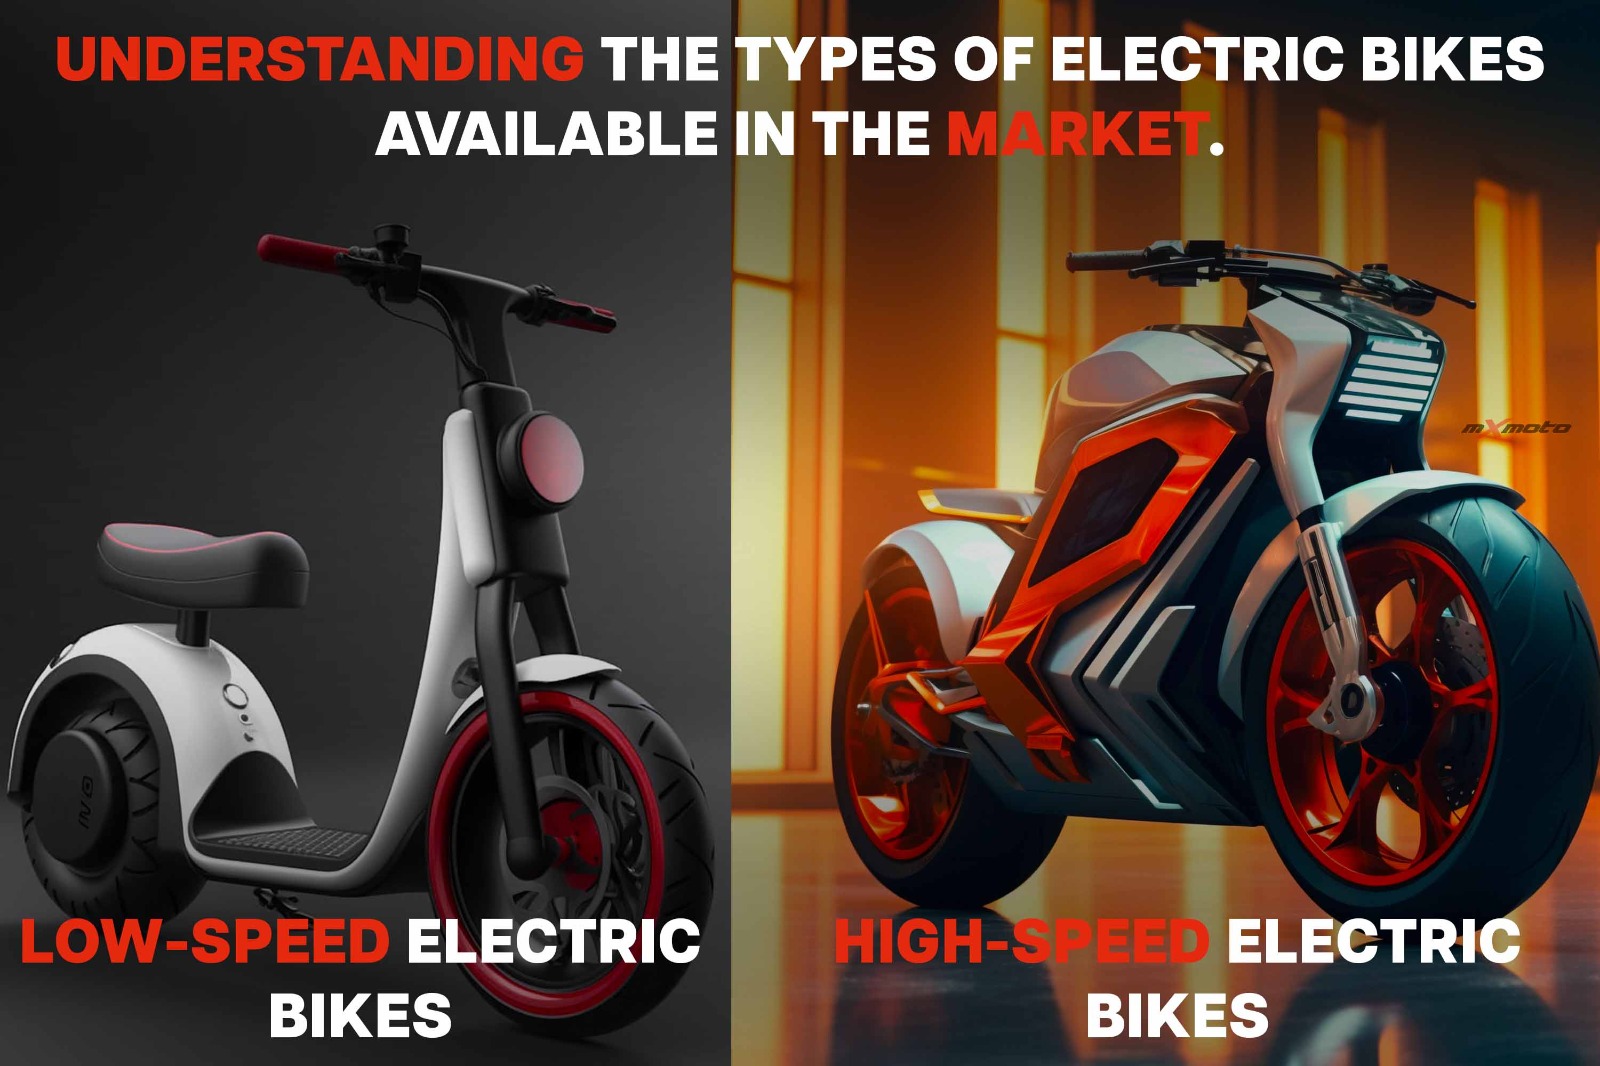 Understanding the Types of Electric Bikes